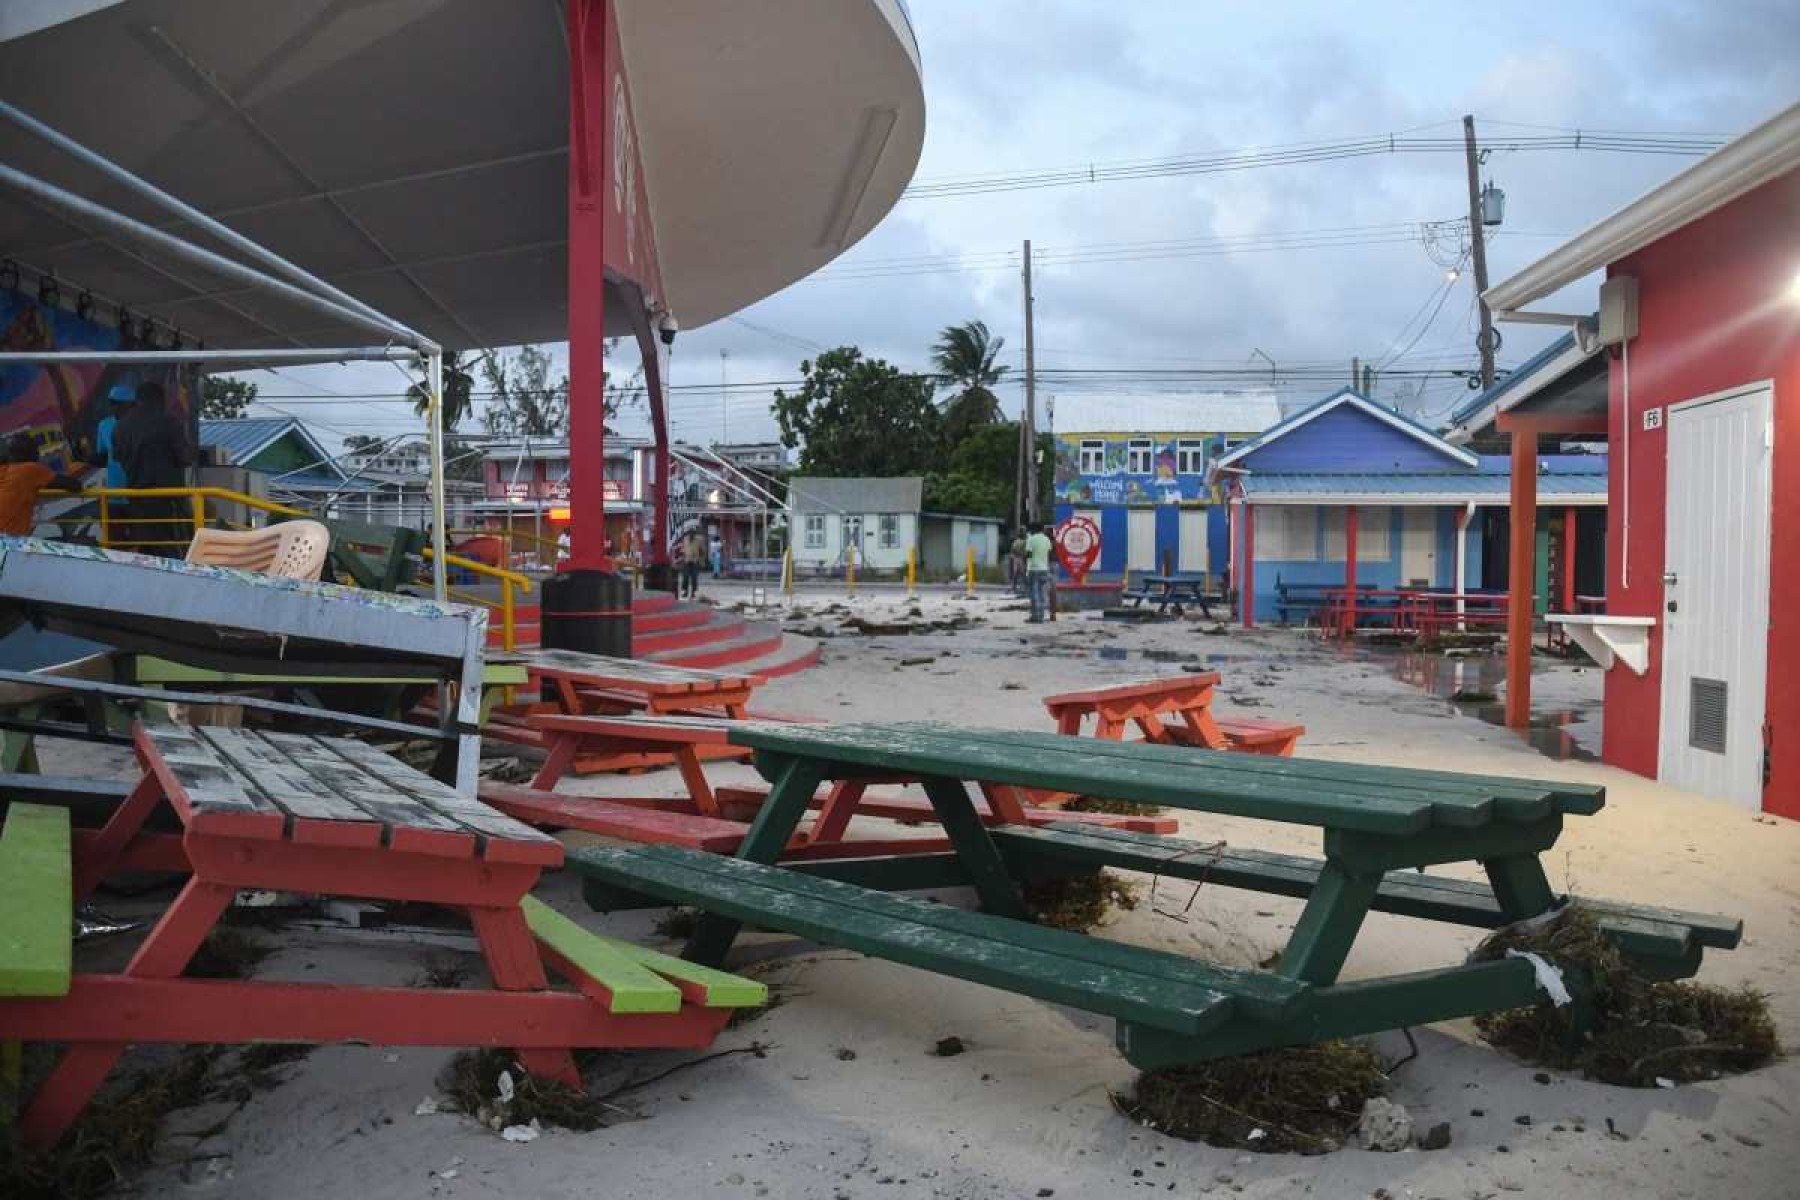  Damaged outdoor furniture is seen after the passage of Hurricane Beryl in Oistins gardens, Christ Church, Barbados on July 1, 2024. (Photo by Randy Brooks / AFP)       